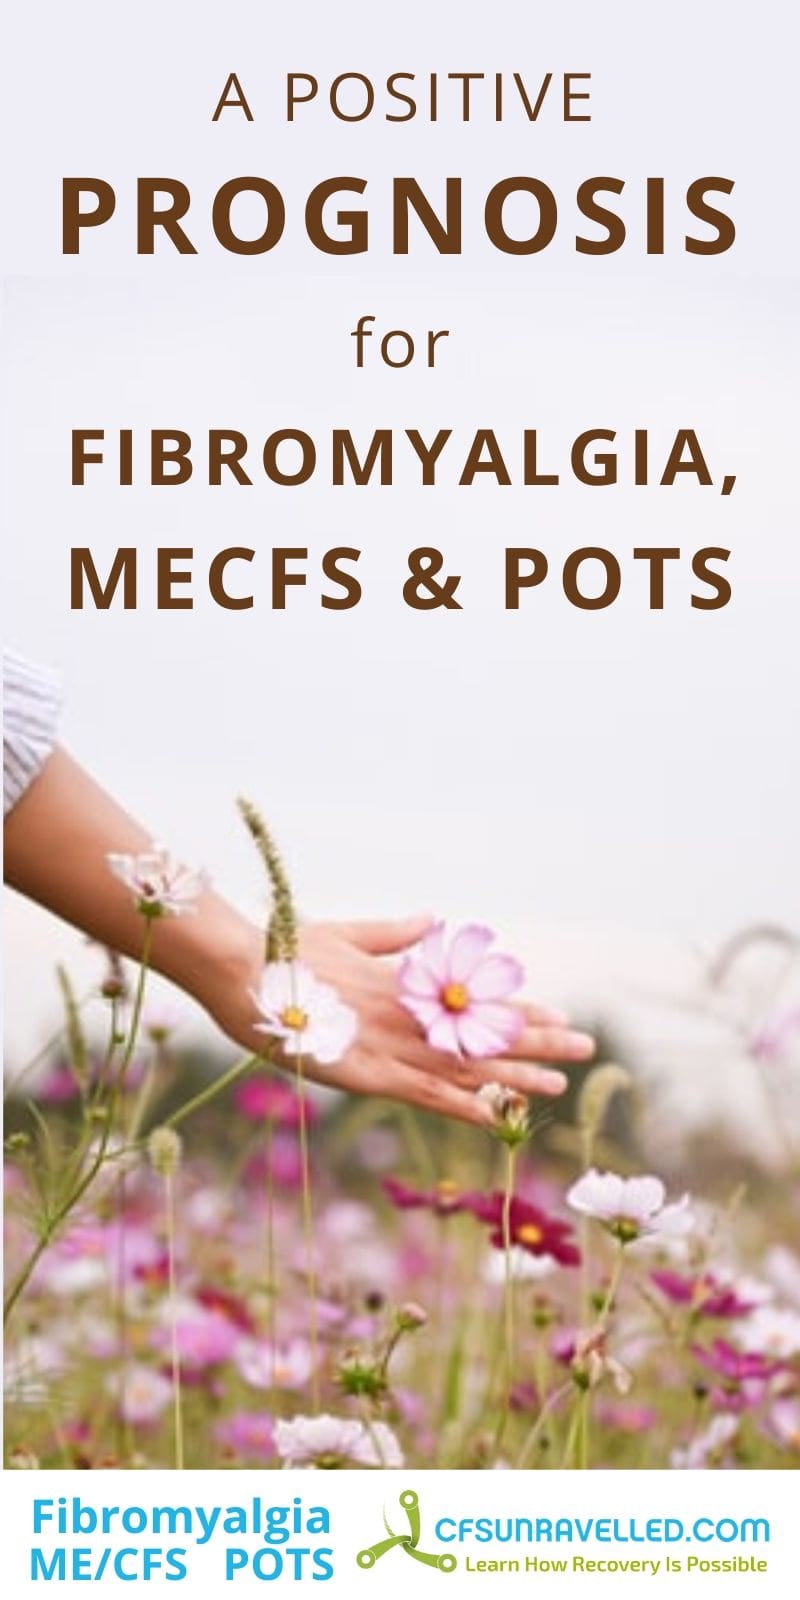 Womans hand touching flowers with a positive prognosis for MECFS POST and Fibromyalgia